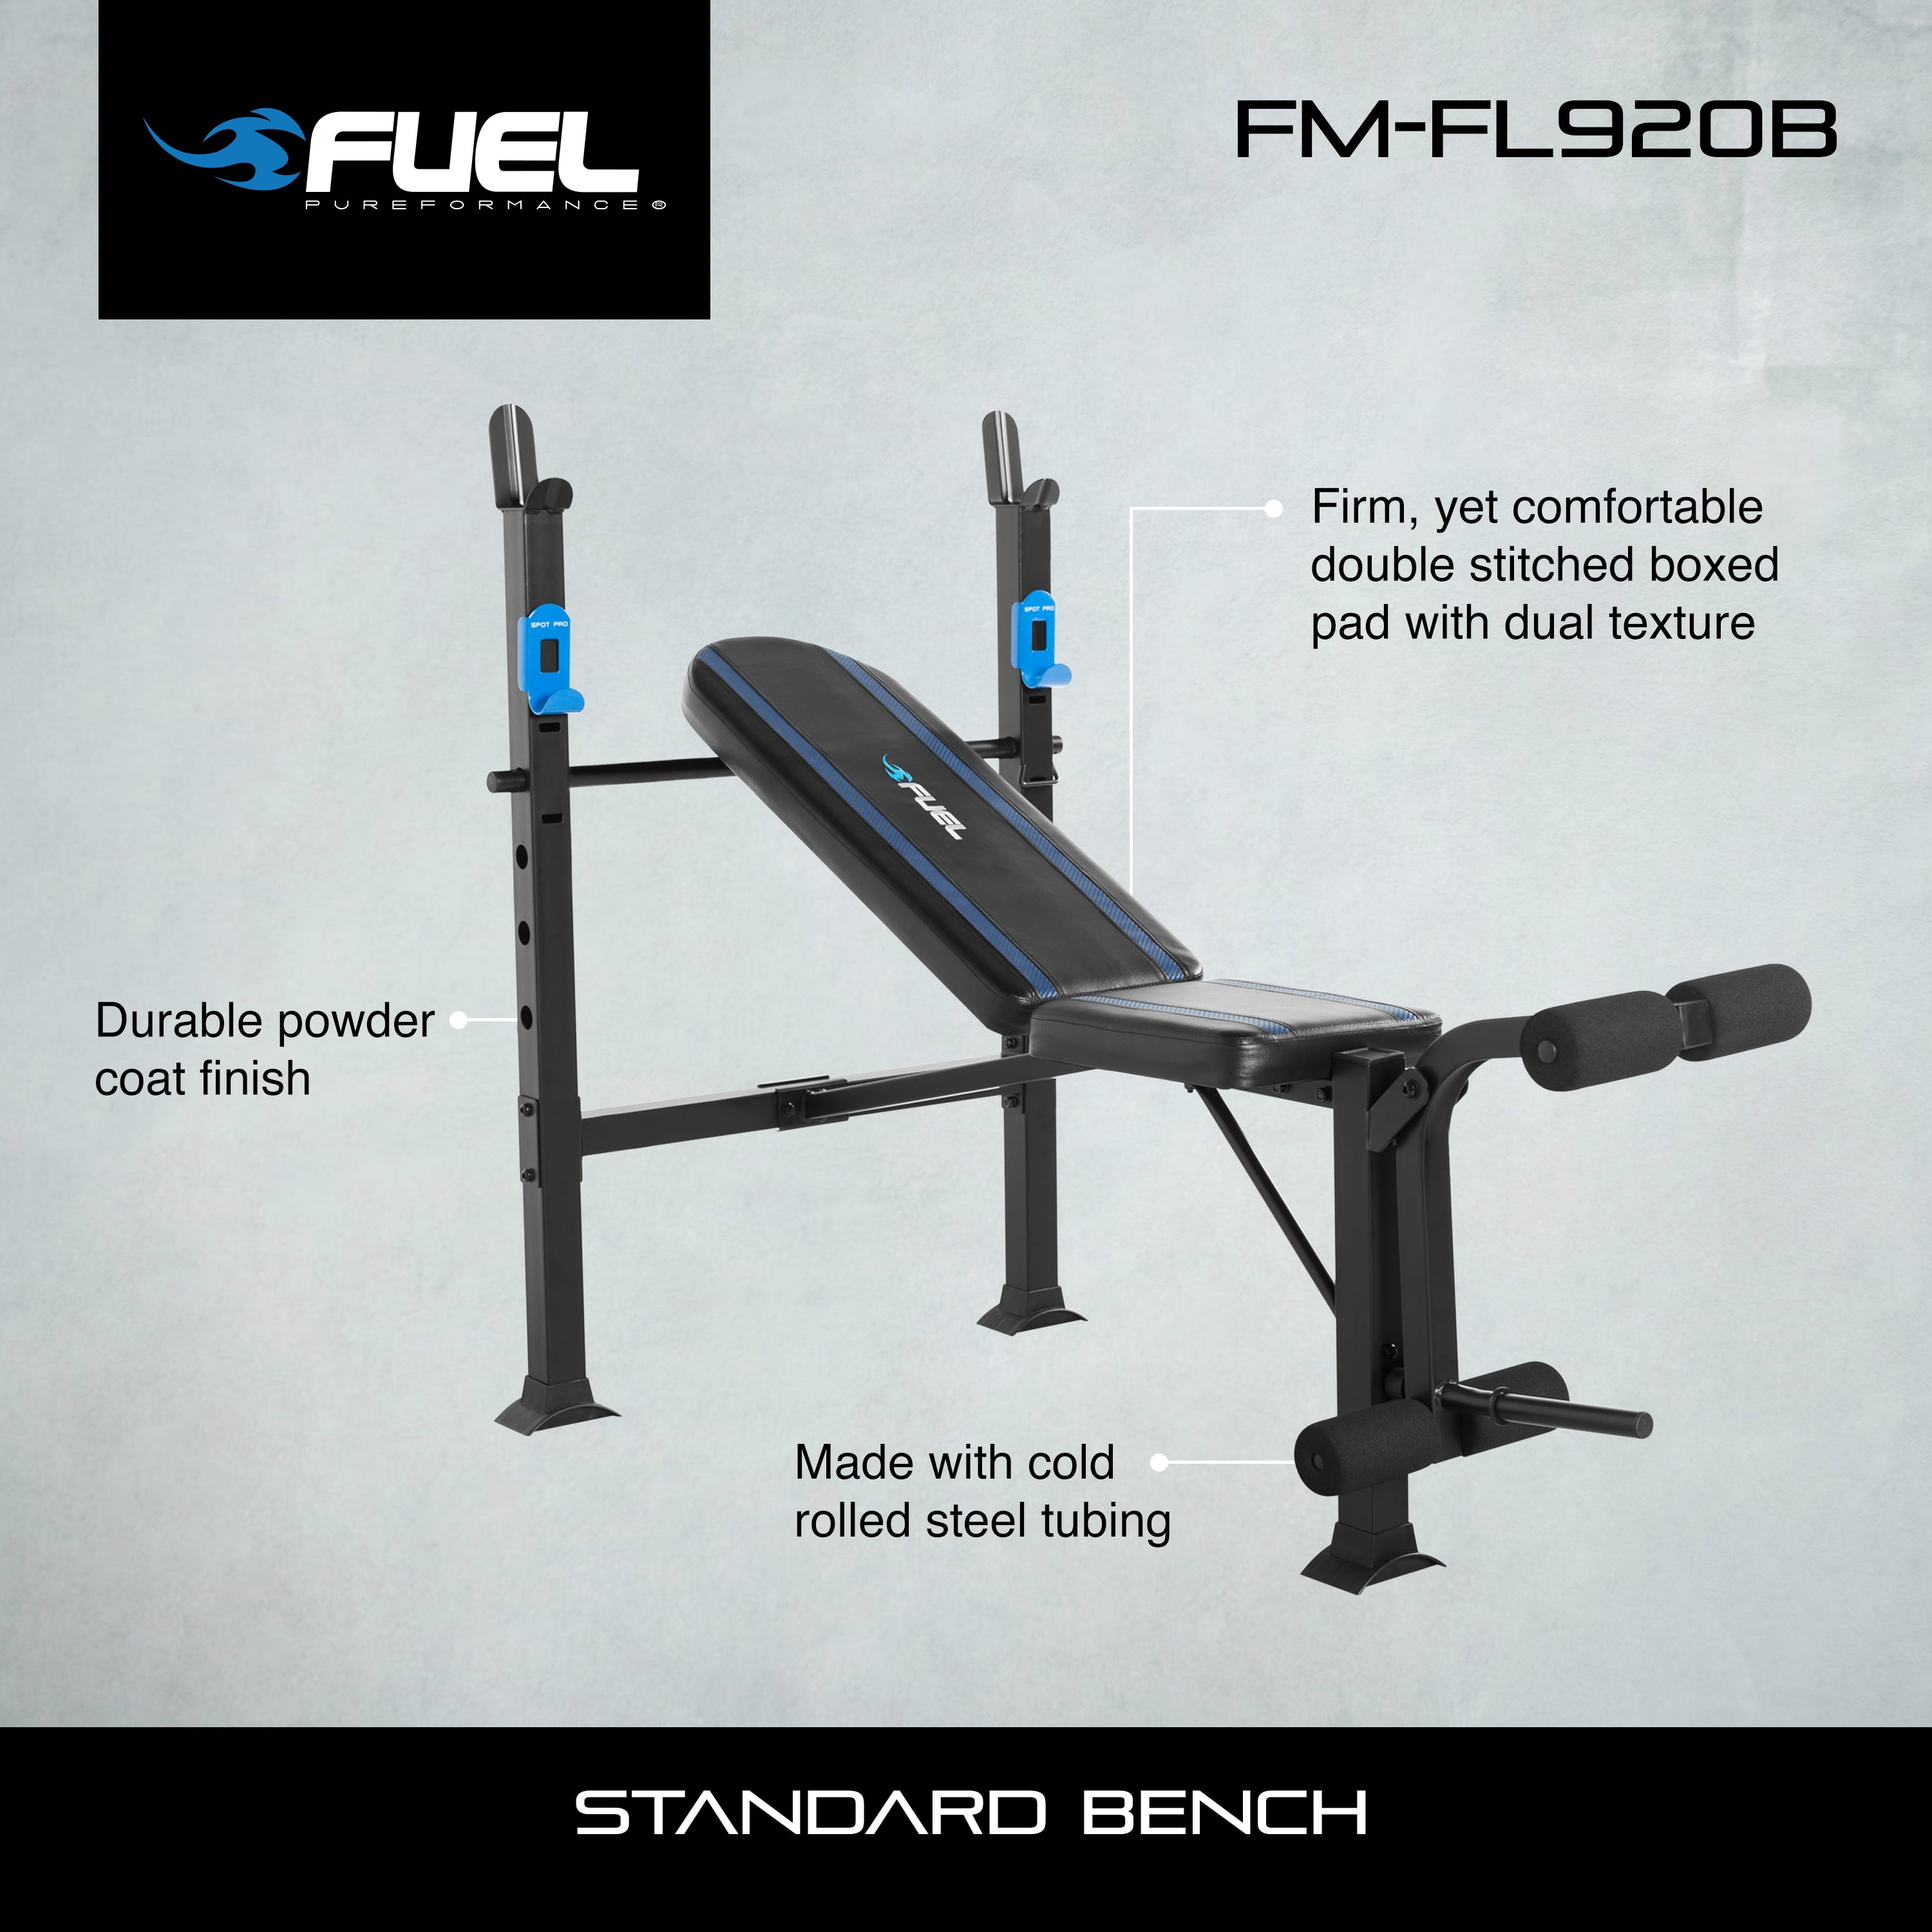 Fuel Pureformance Adjustable Standard with Blue Bench (500 Stripes Weight Weight Developer, lb Capacity) Leg